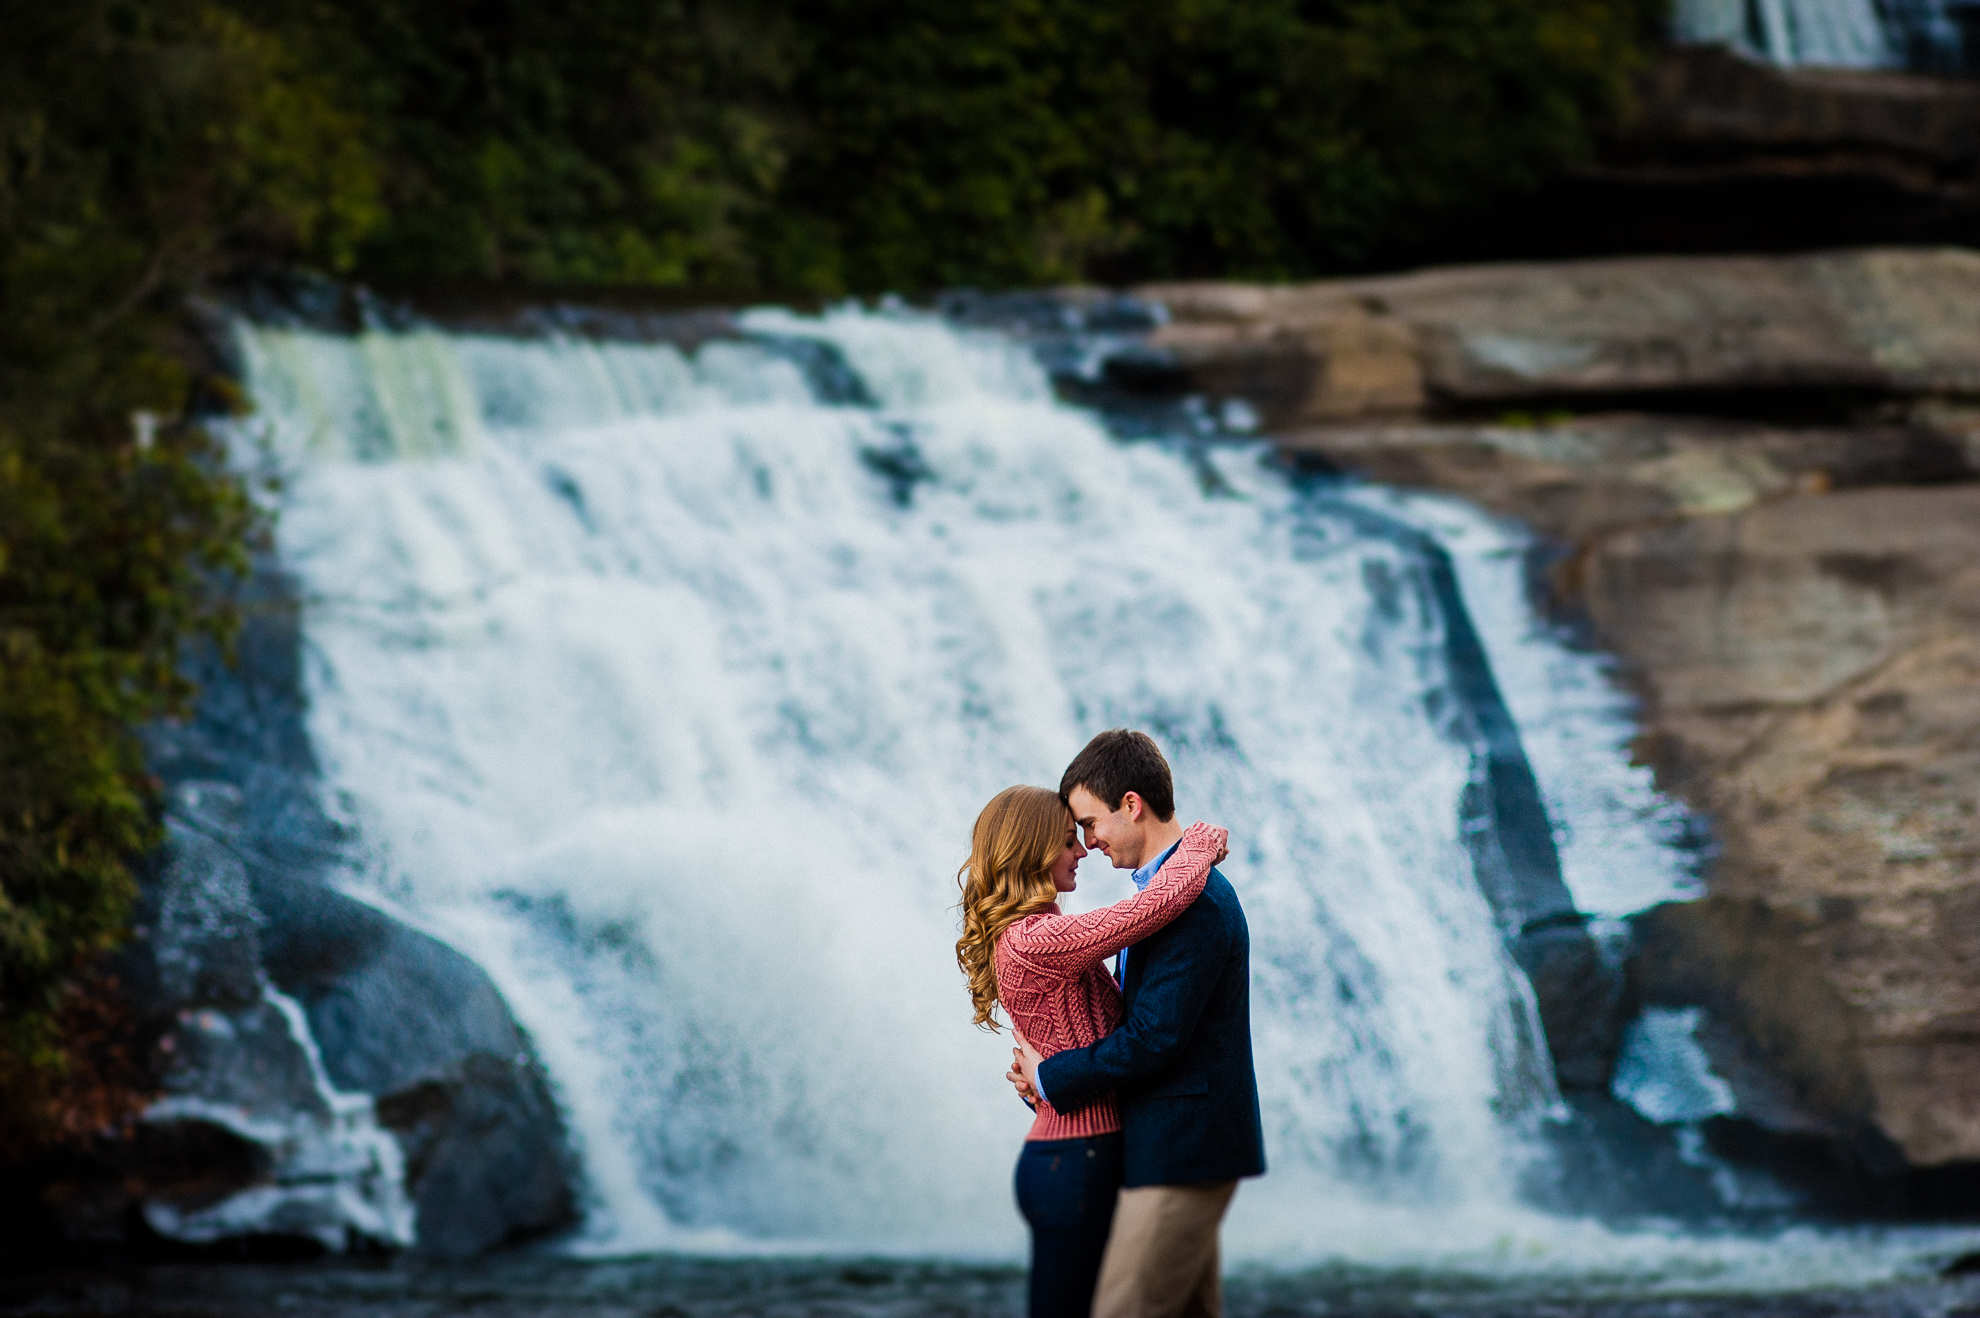 dupont state forest waterfall engagement photo